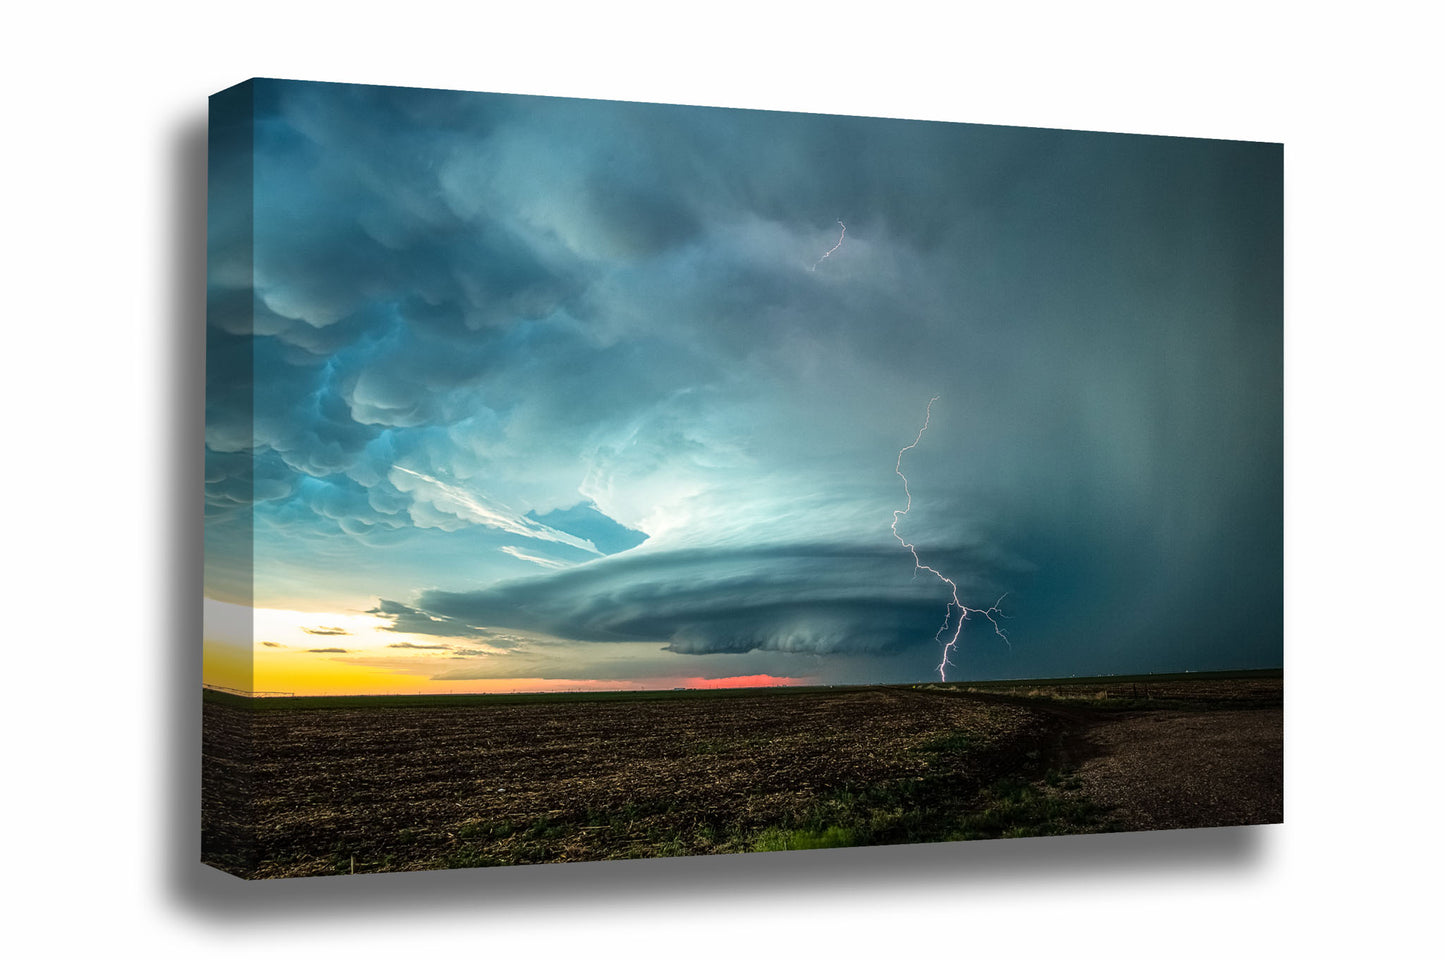 Storm canvas wall art of a lightning bolt striking from a supercell thunderstorm on a stormy spring evening in Kansas by Sean Ramsey of Southern Plains Photography.